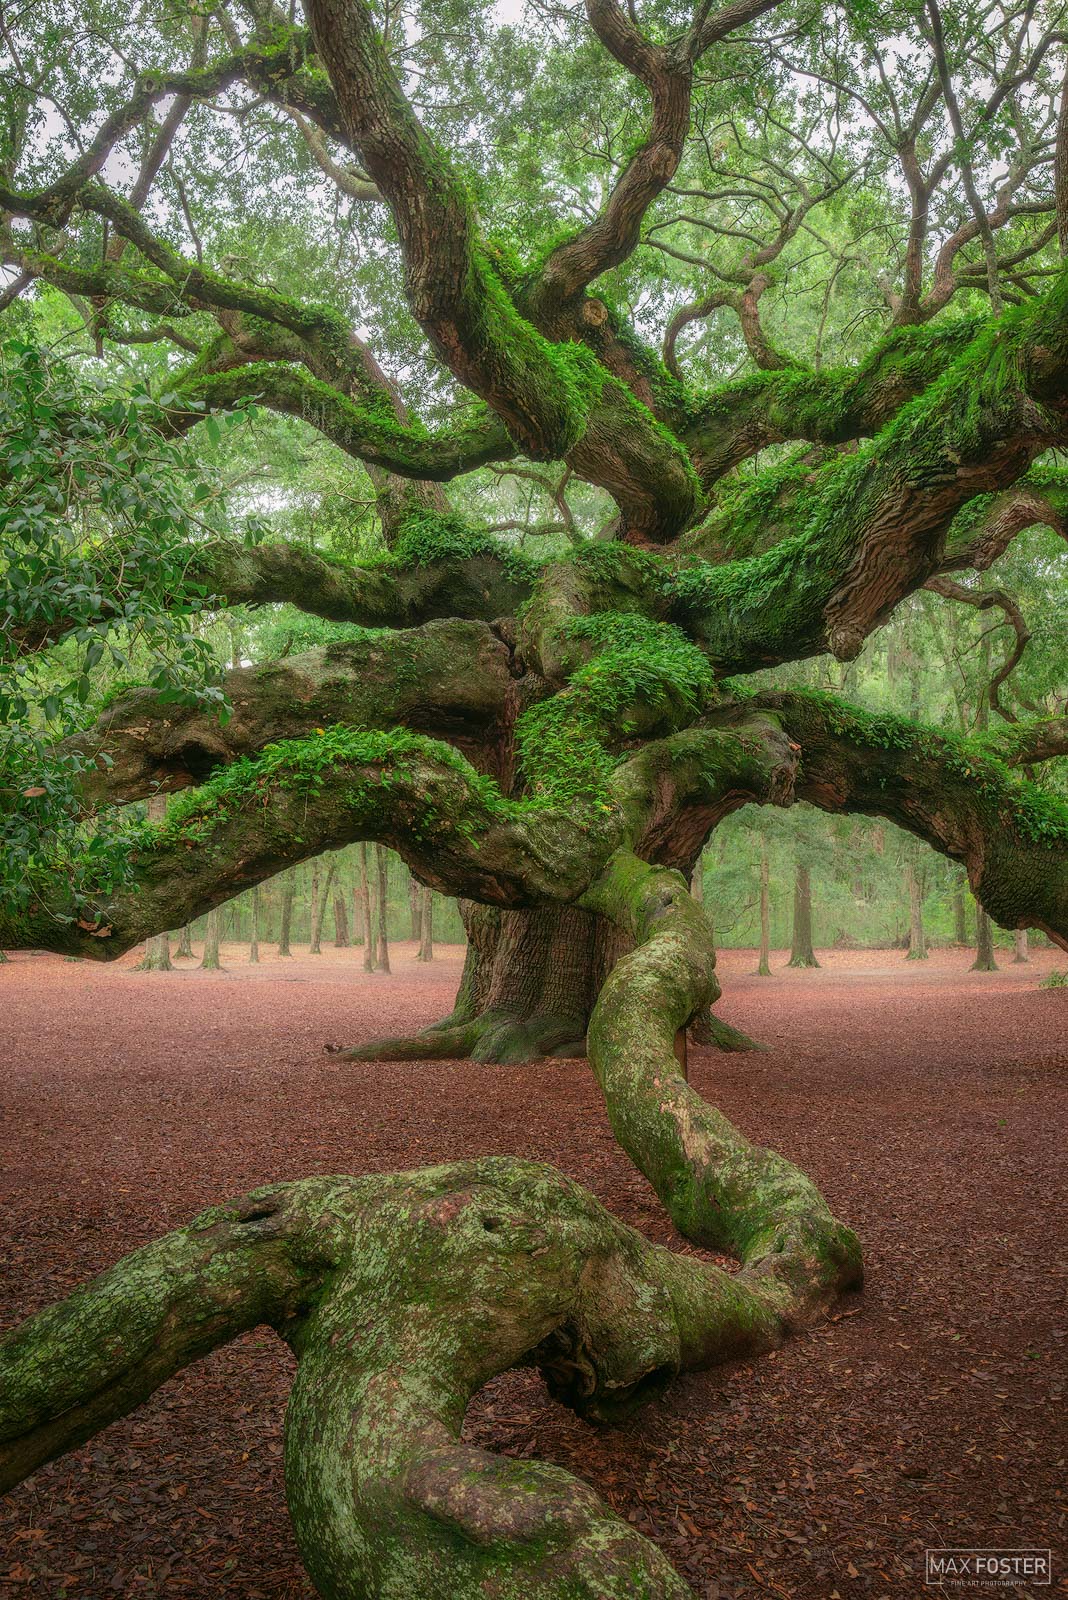 Bring nature into your home with Tangled Titan, Max Foster's limited edition photography print of the famous Angel Oak in South...